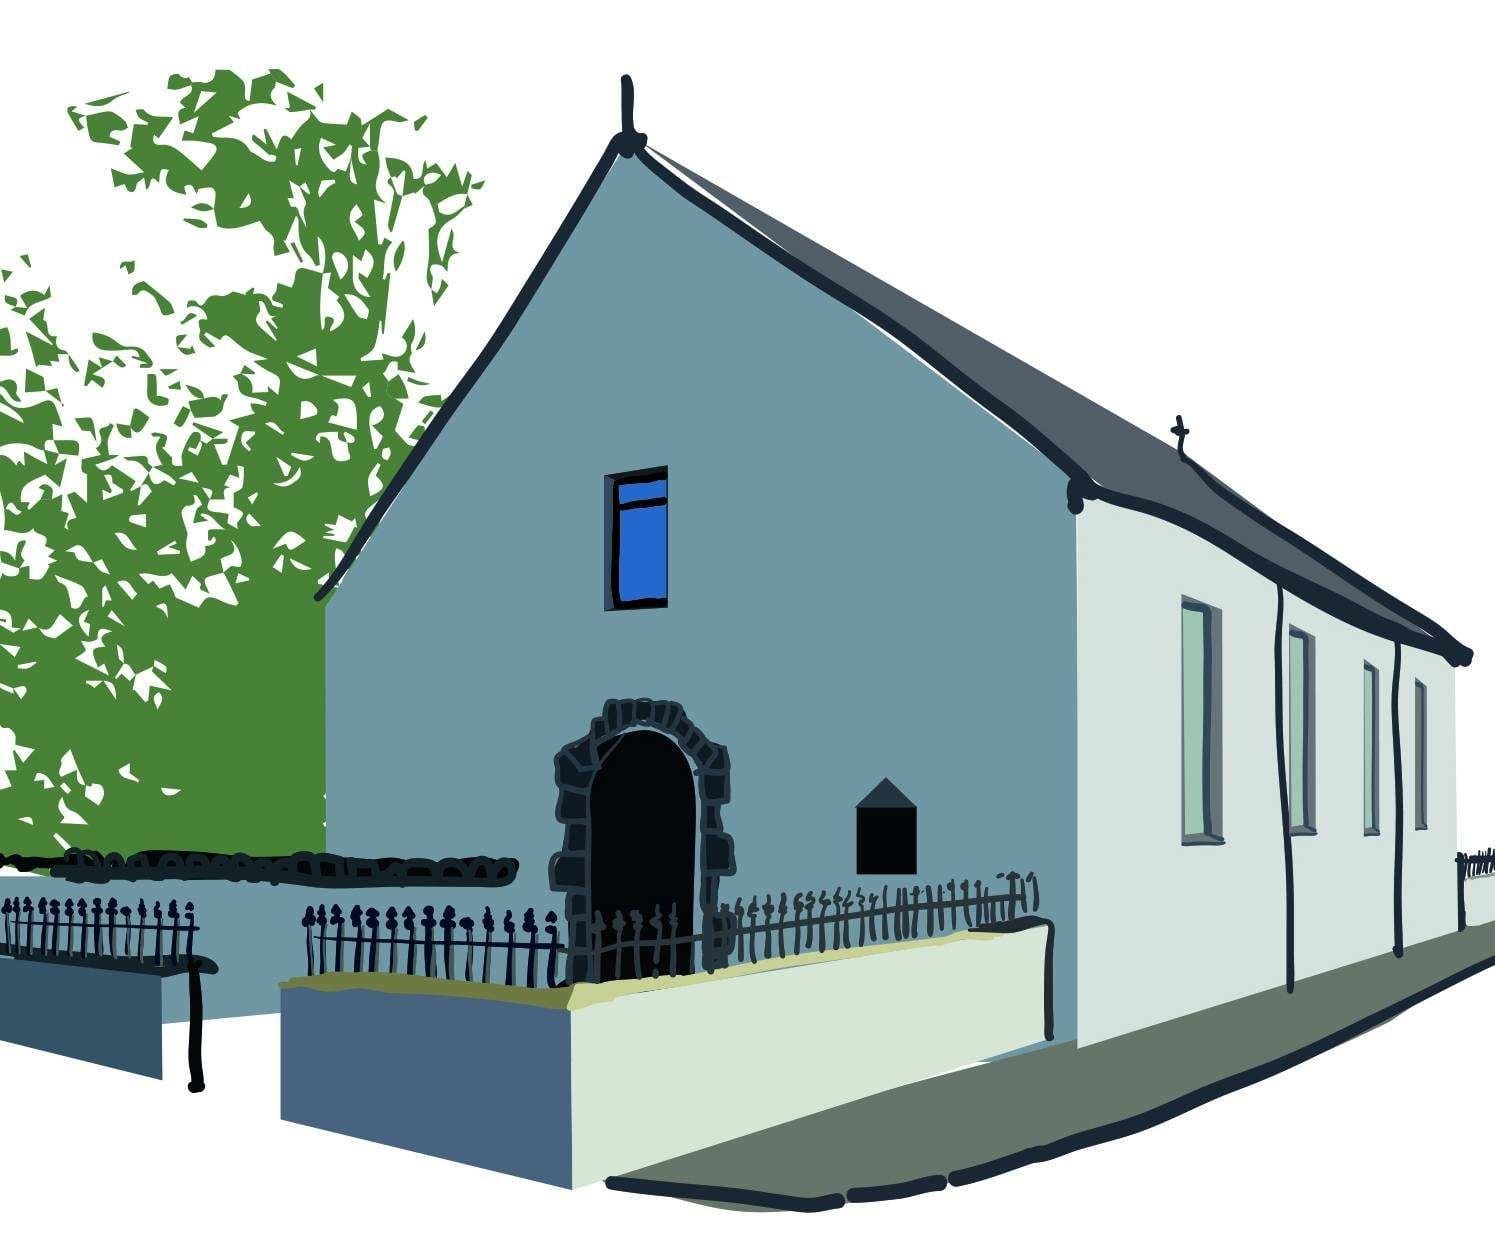 Applecross Community Council is looking into turning the Church of Scotland church building at Camusterrach into a community hub.